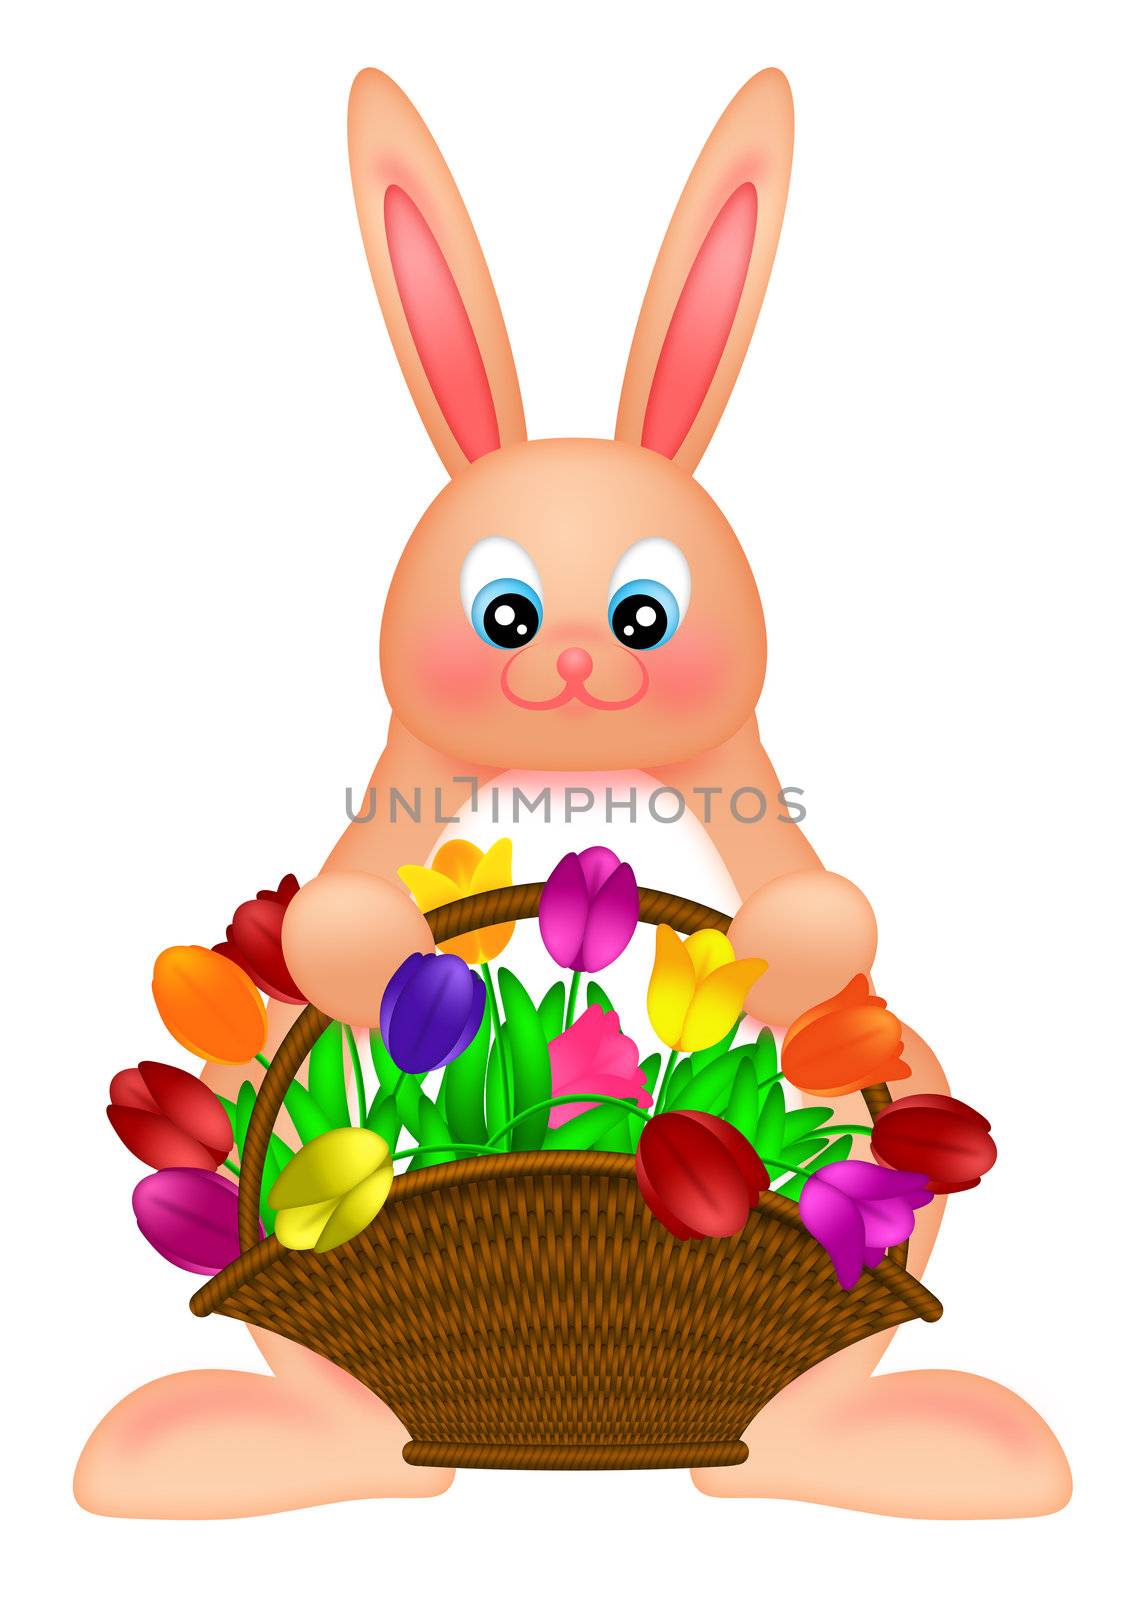 Happy Easter Bunny Rabbit Holding a Basket of Colorful Tulips Flowers Illustration Isolated on White Background